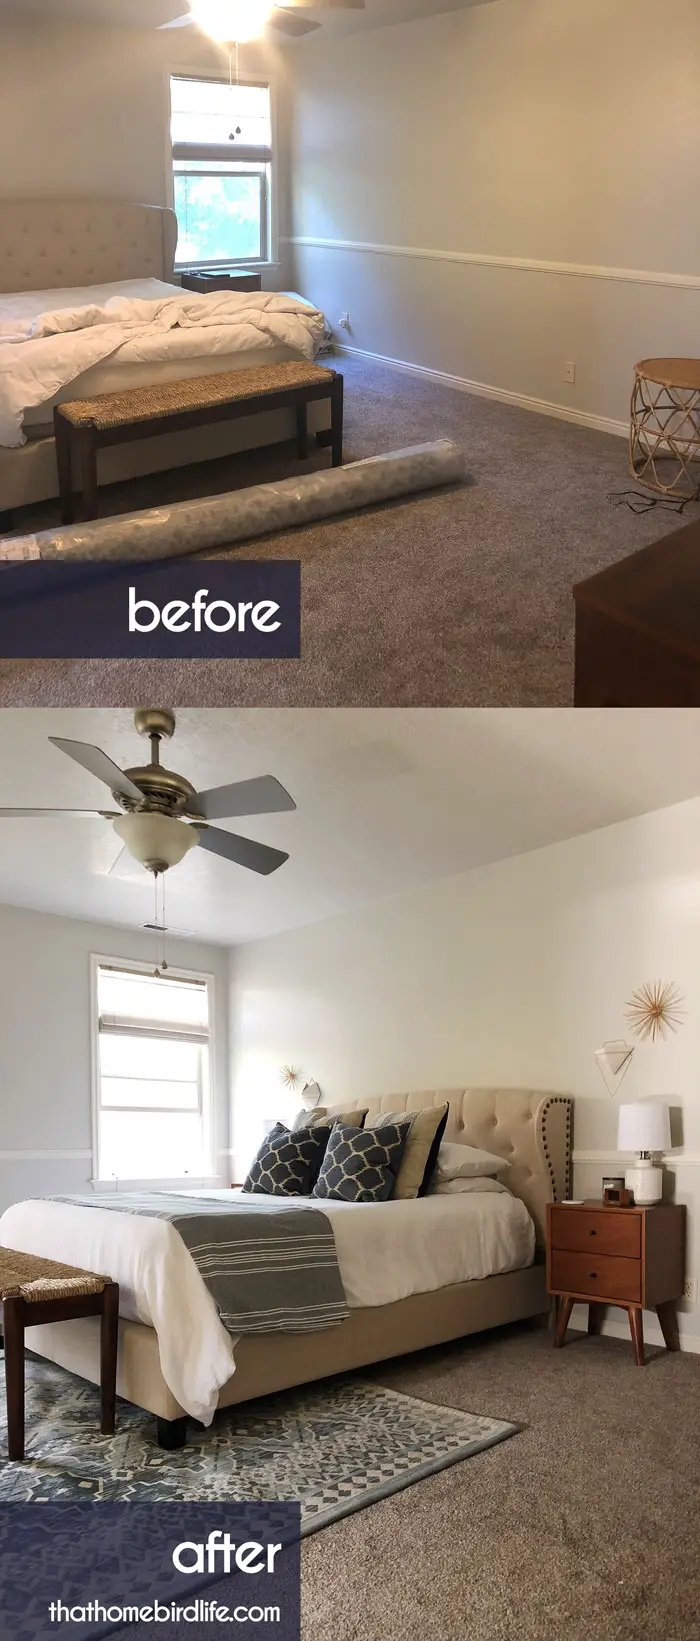 BEFORE AND AFTER - Mid Century Modern, Coastal, Master Bedroom Makeover - That Homebird Life Blog